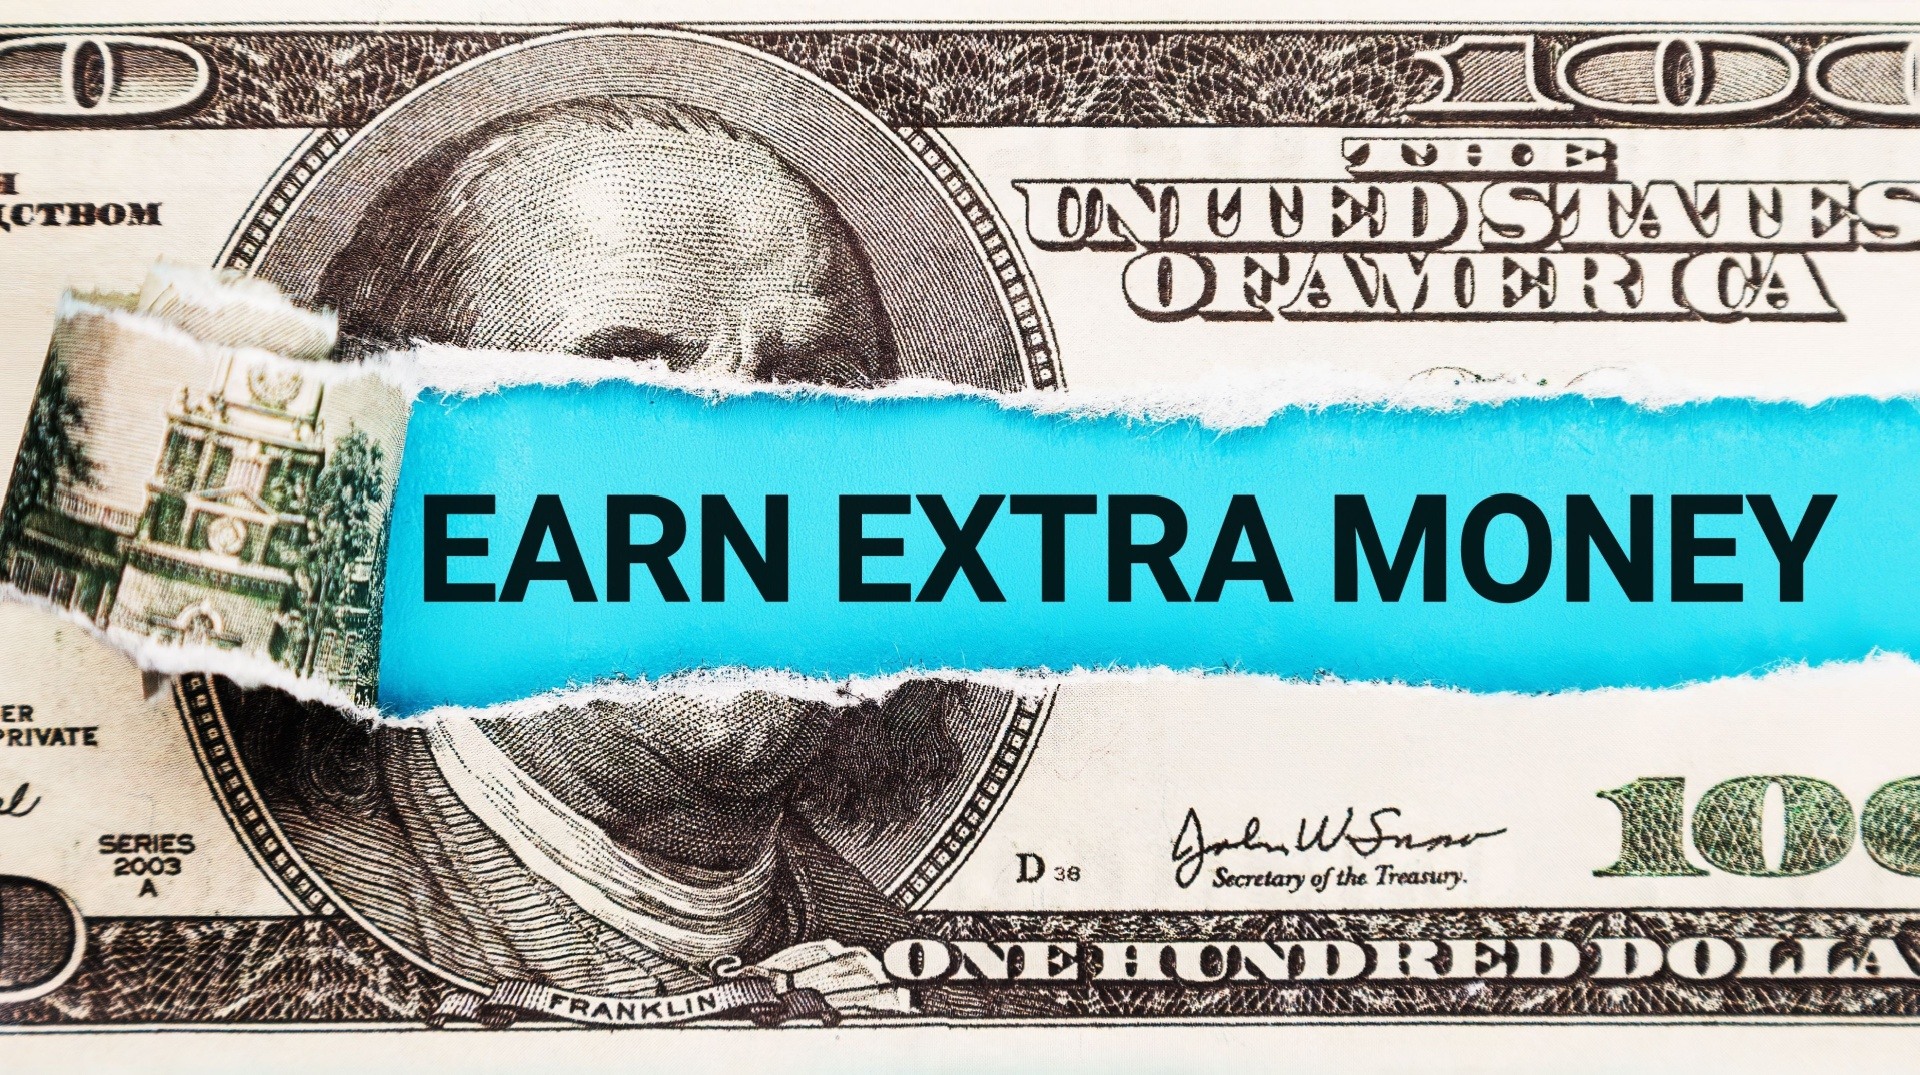 money with tear in it saying earn extra money. It is also a $ bill